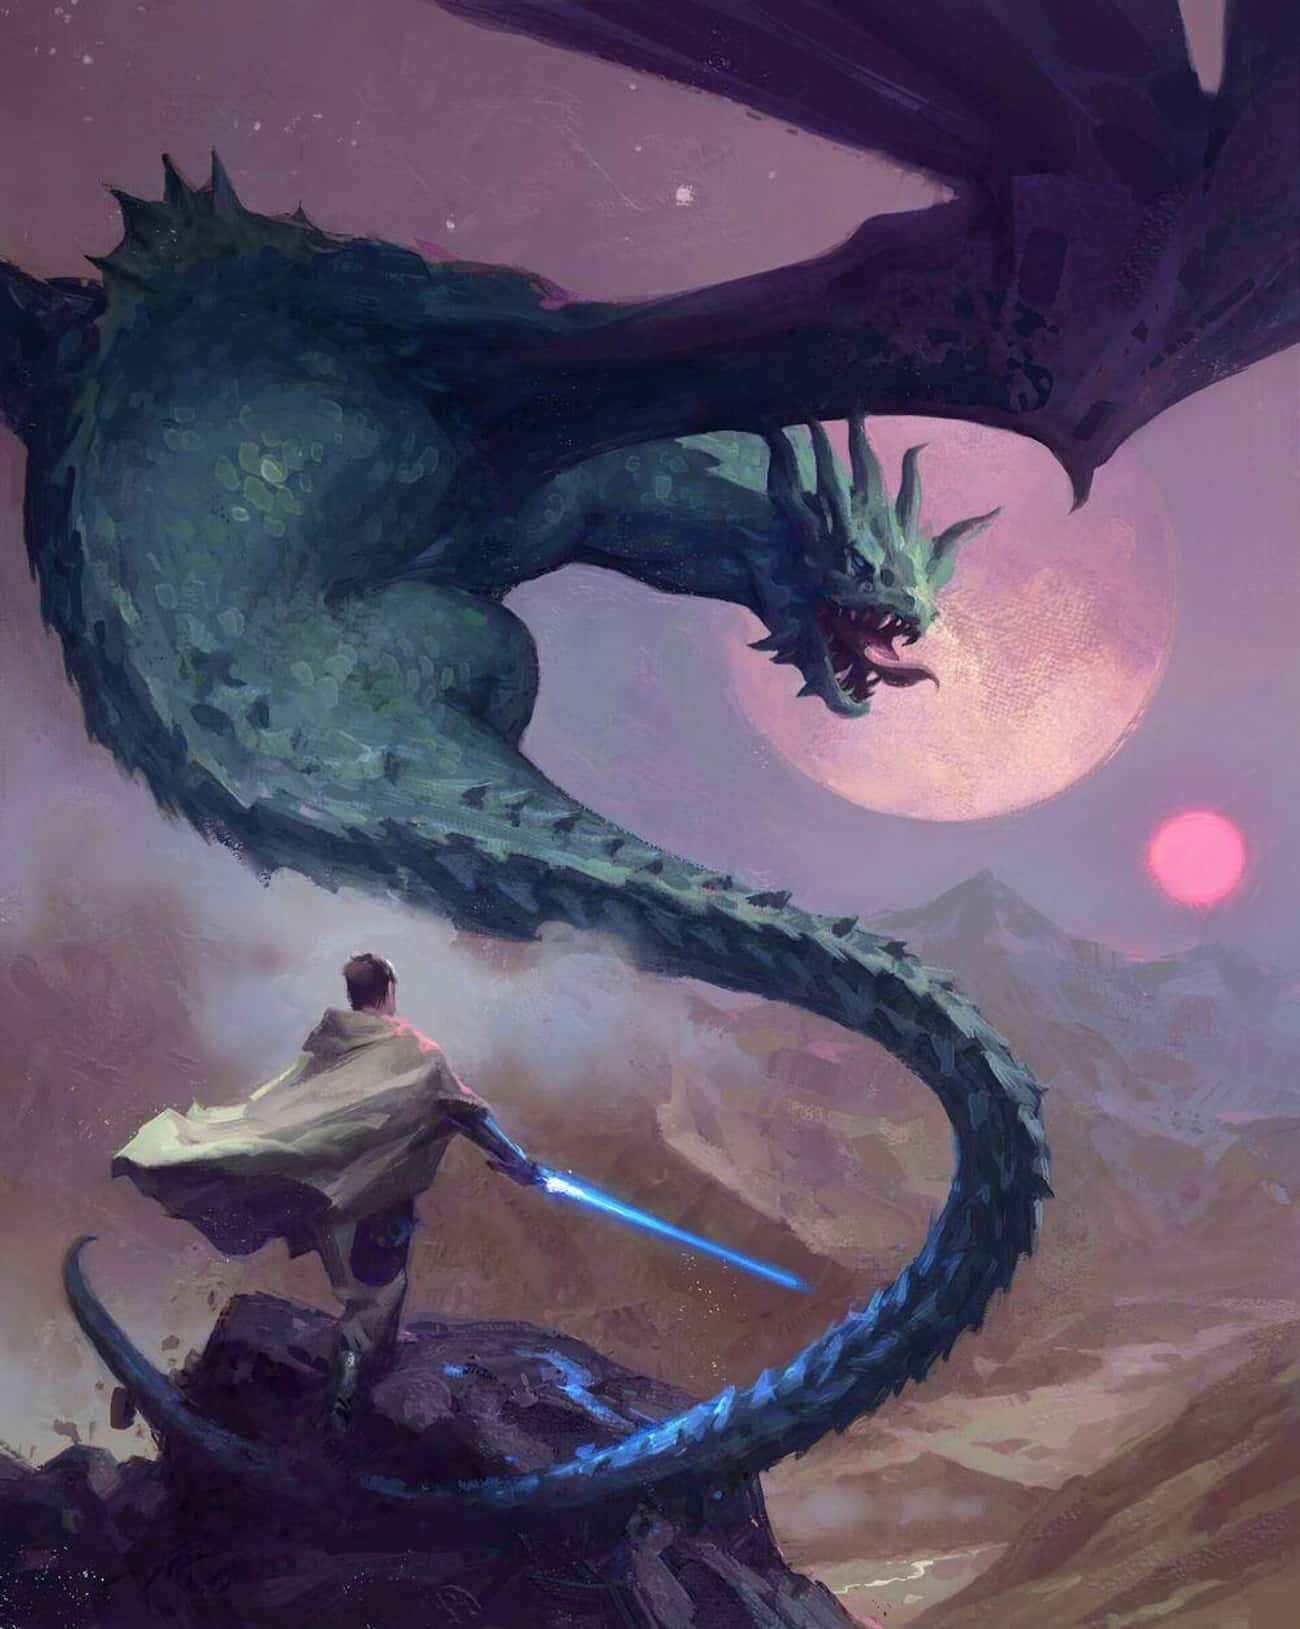 He Became A Part Of Tatooine Folklore In A Story Called 'The Knight and the Dragon'